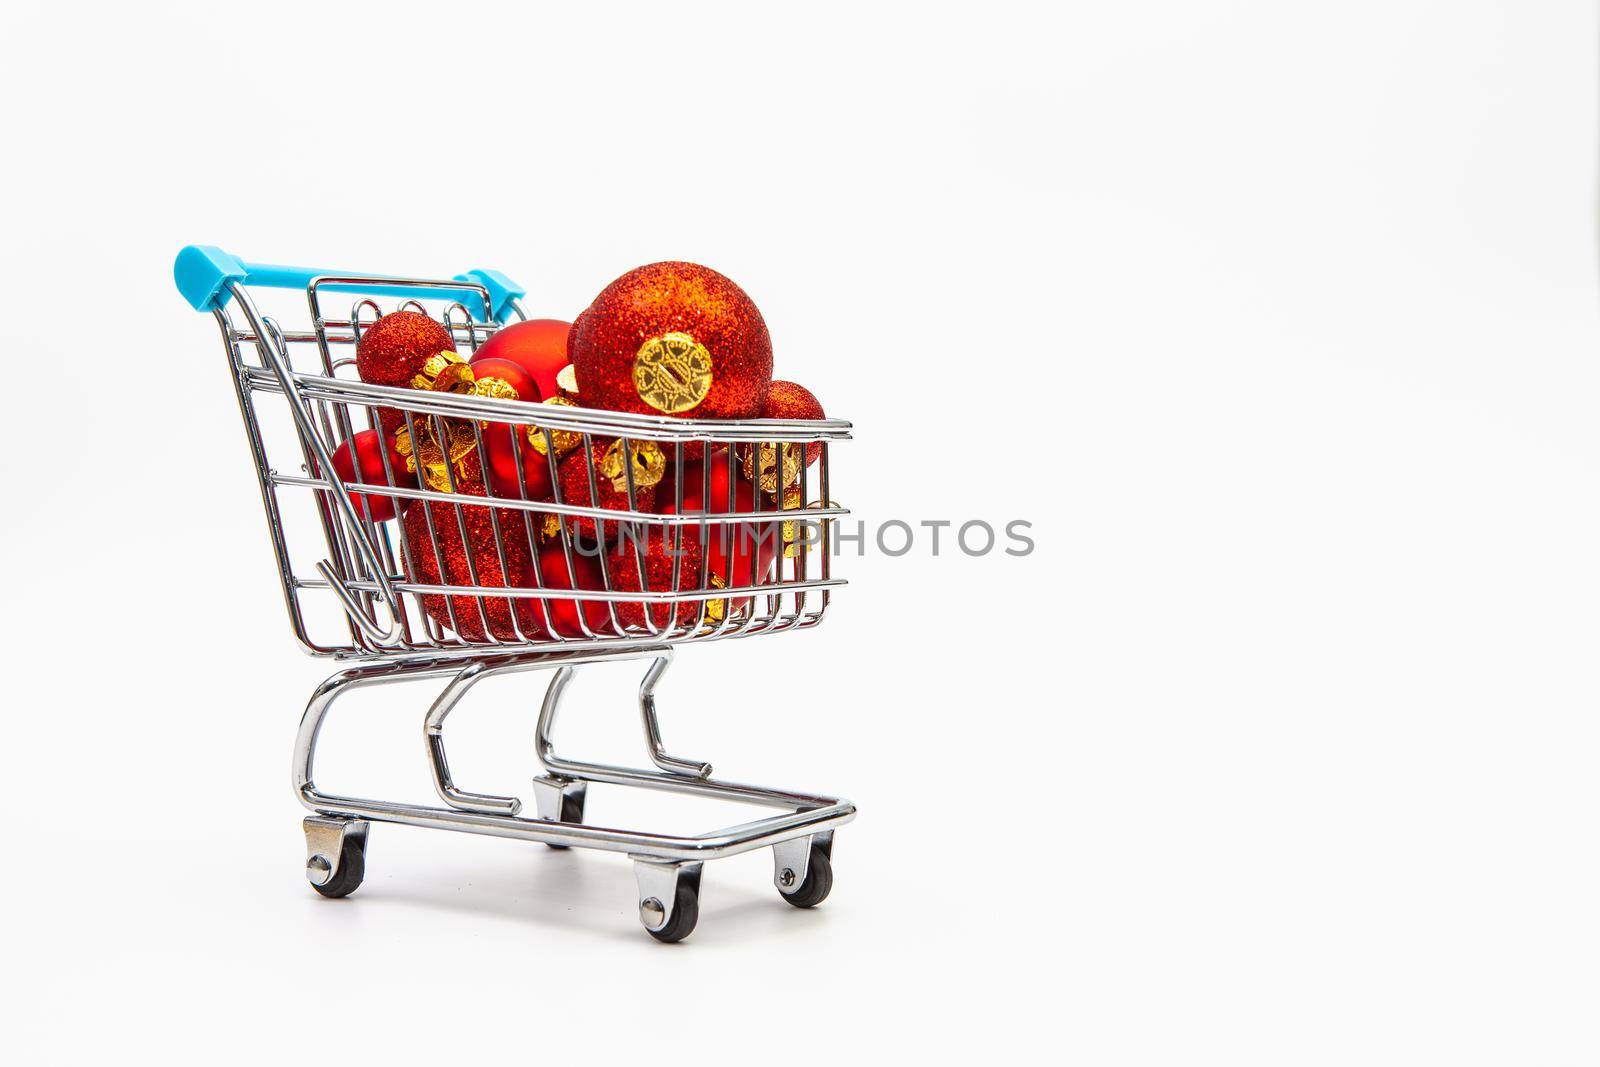 Shopping trolley full of red Christmas balls  by CaptureLight